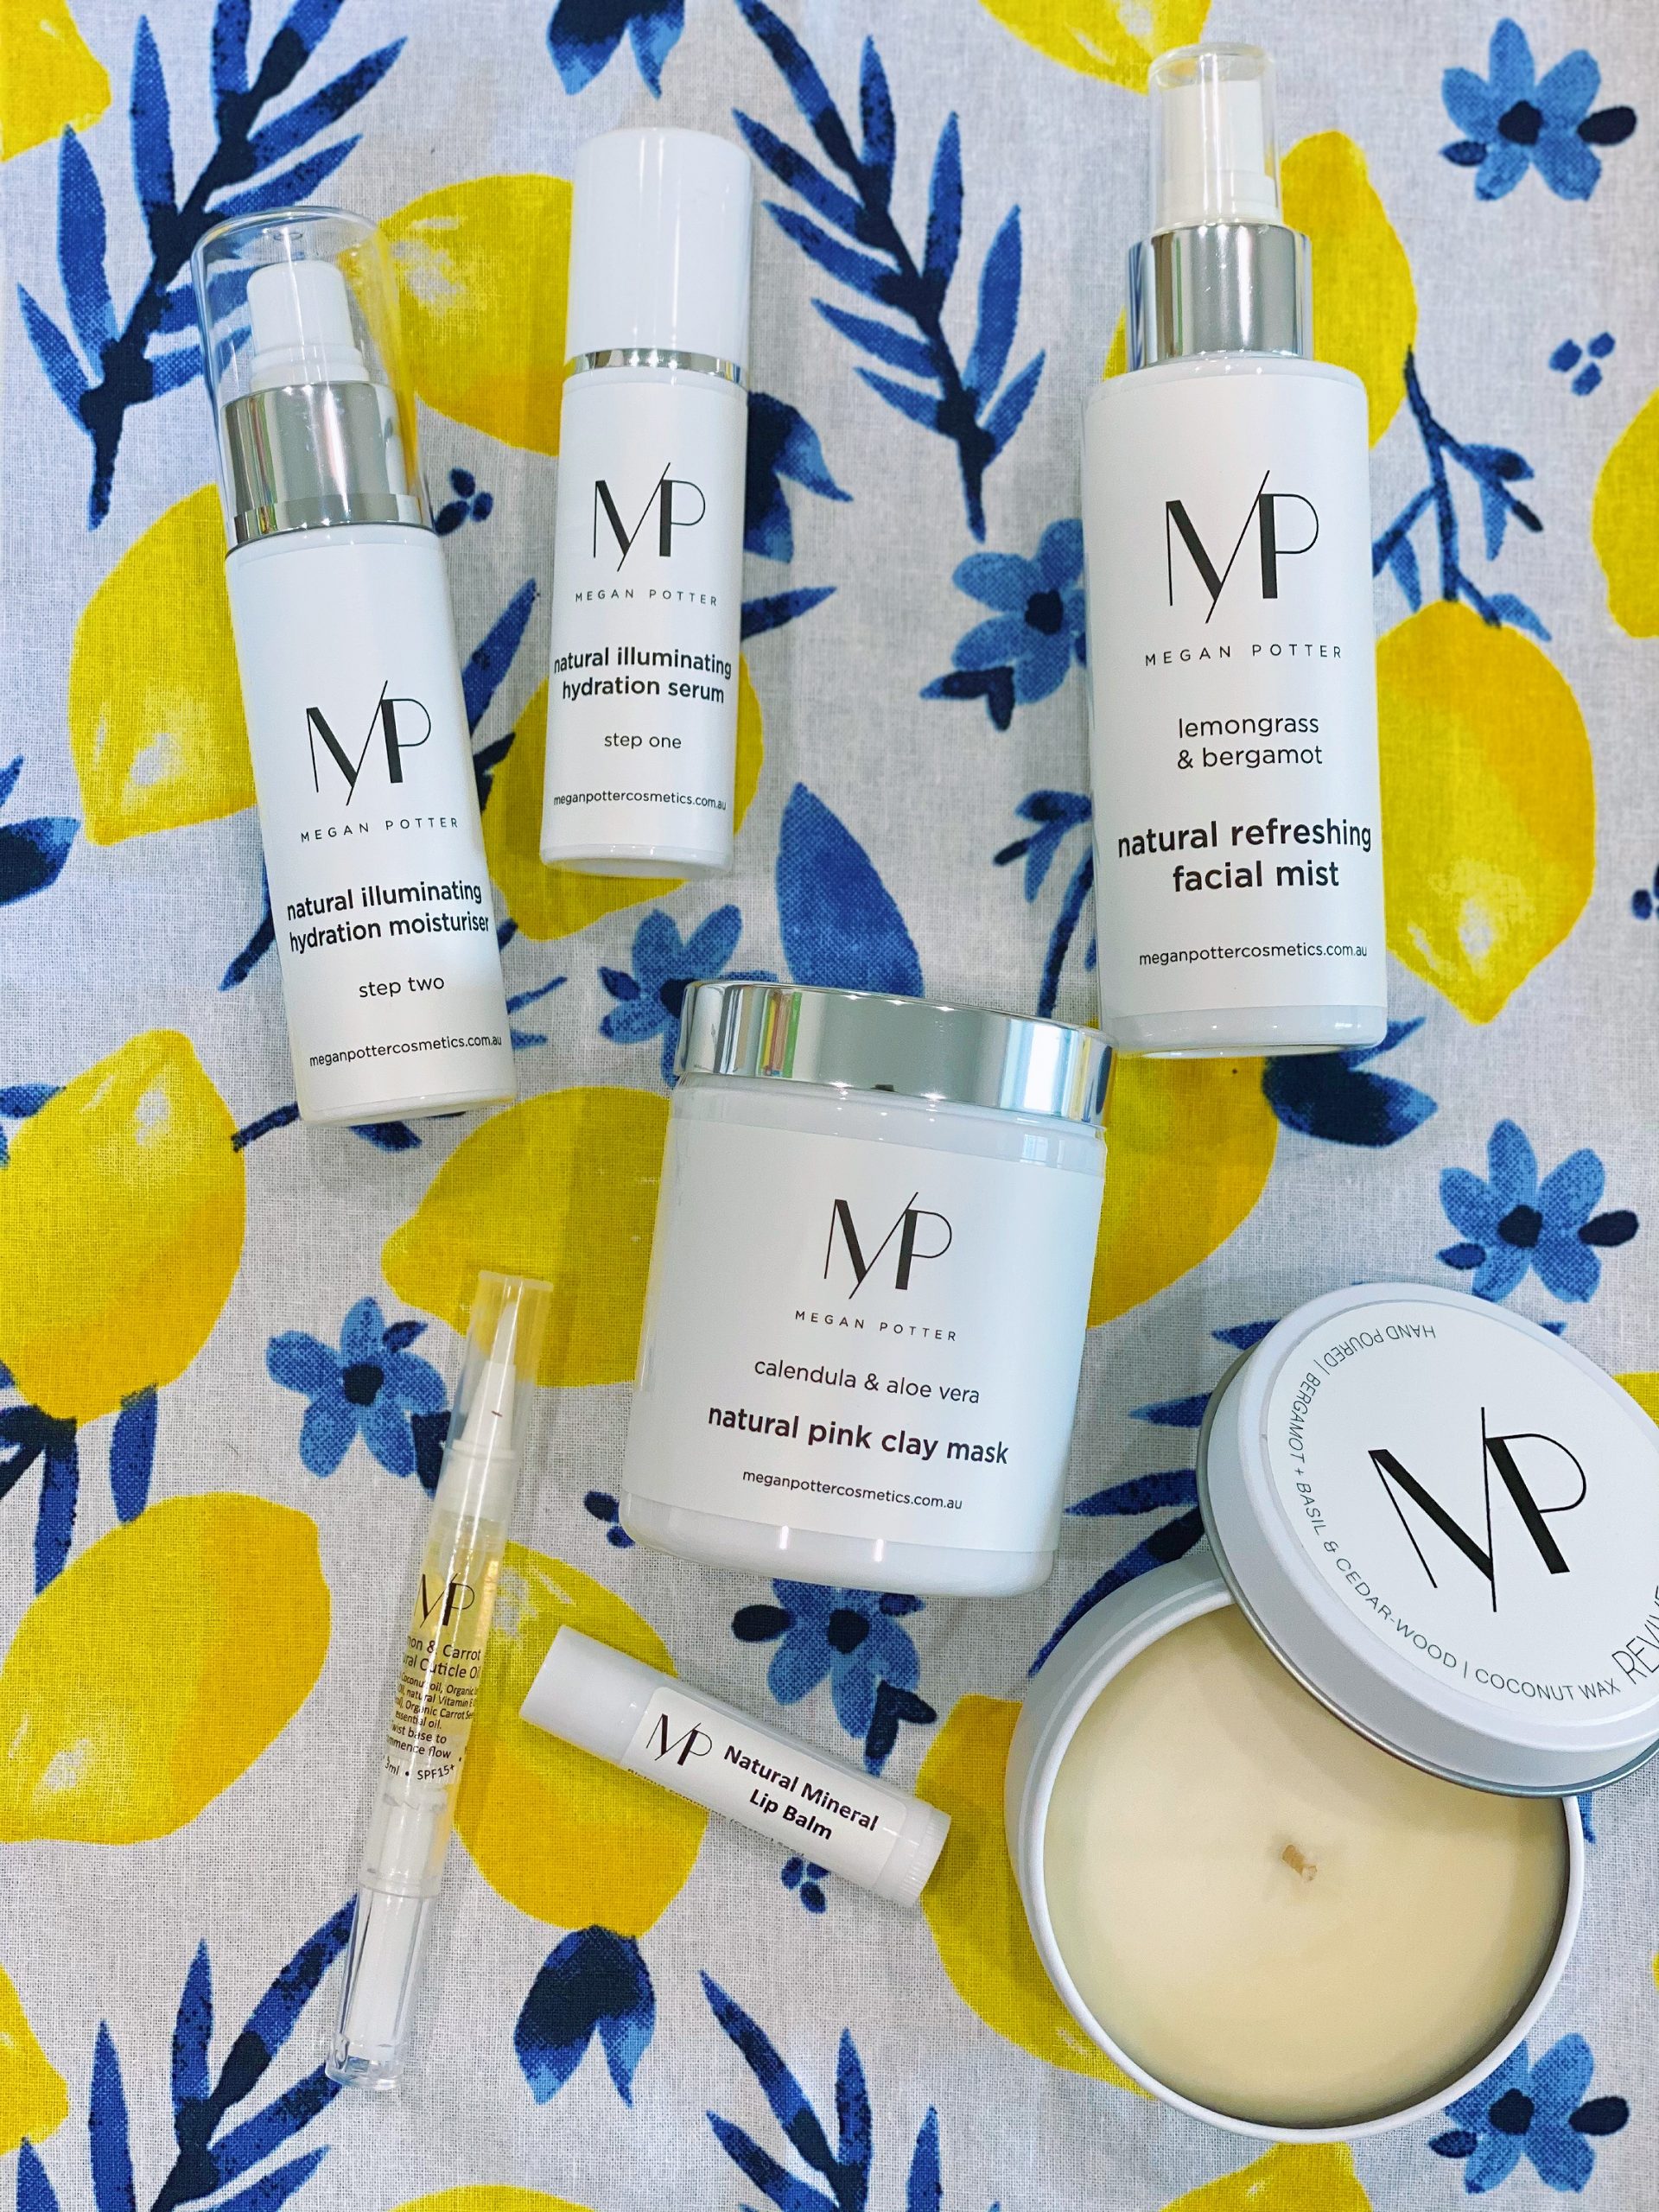 WIN two beautiful skin care packs from Megan Potter